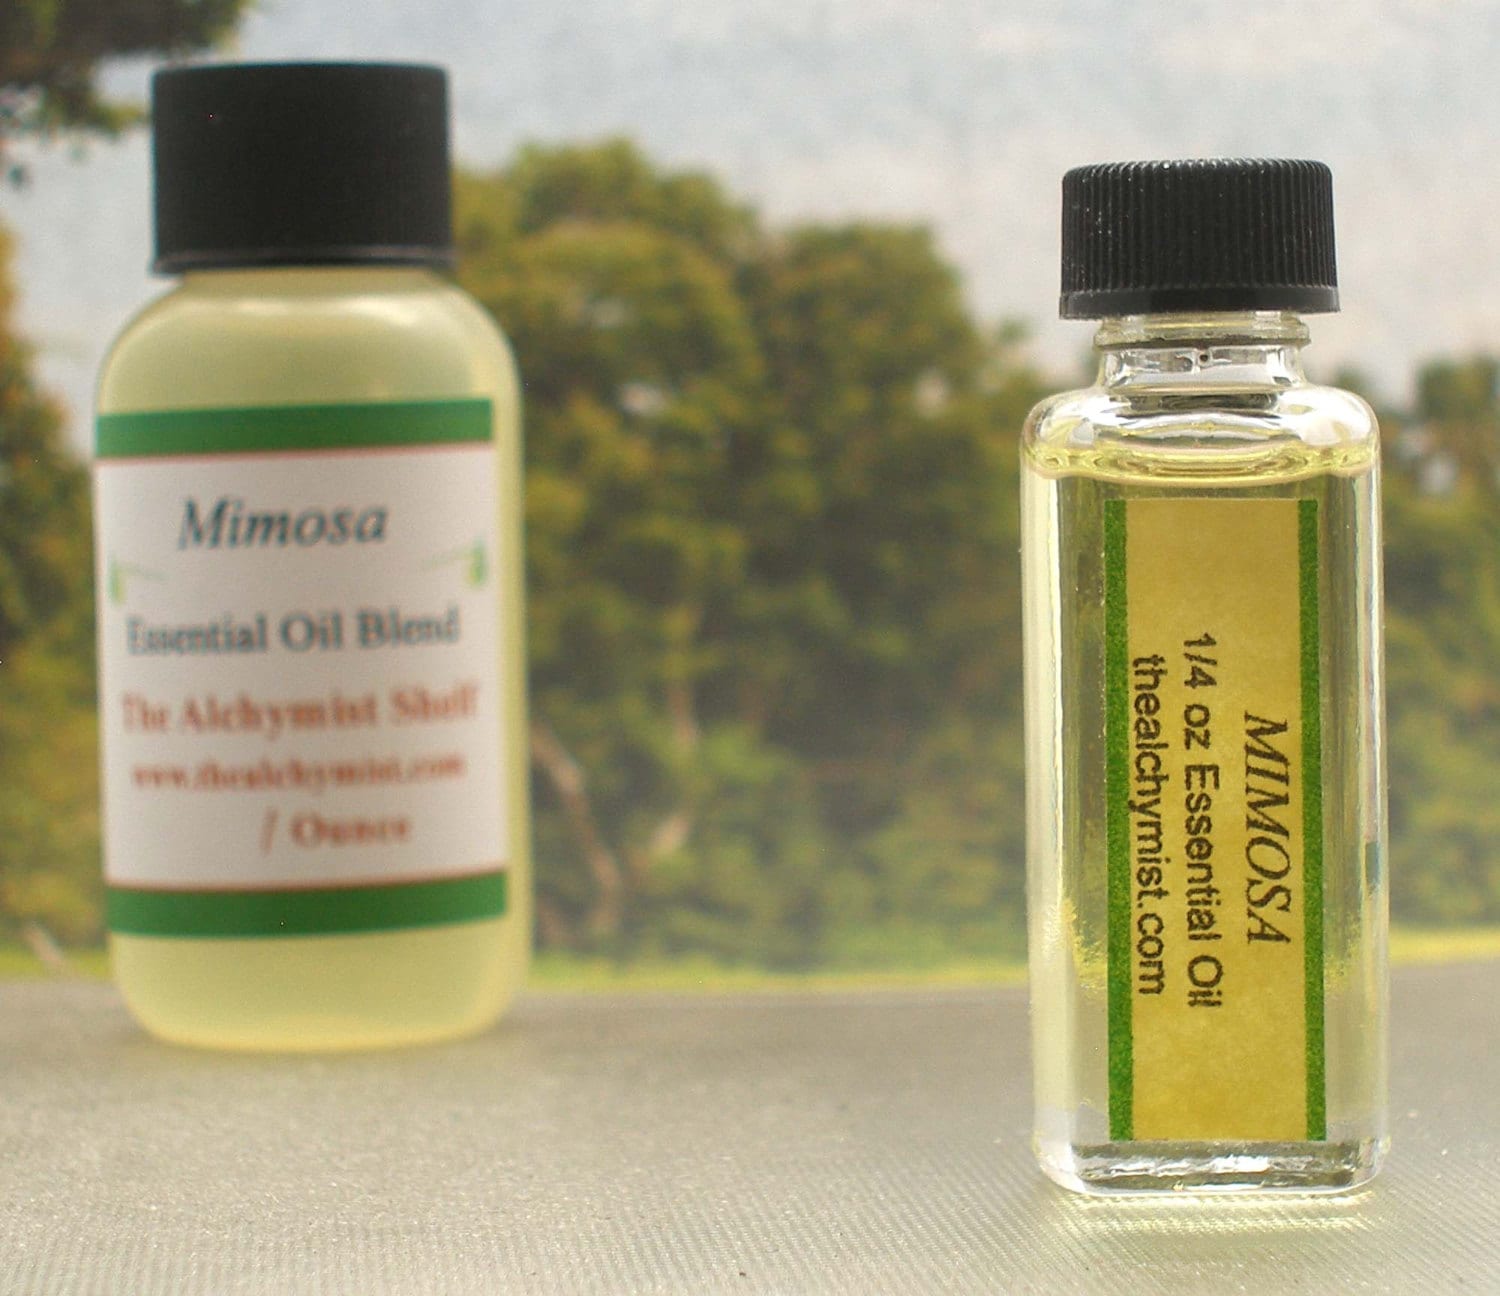 Nag Champa essential oil blend wicca 1 Oz Wiccan Craft Pagan Altar Ritual  Spell